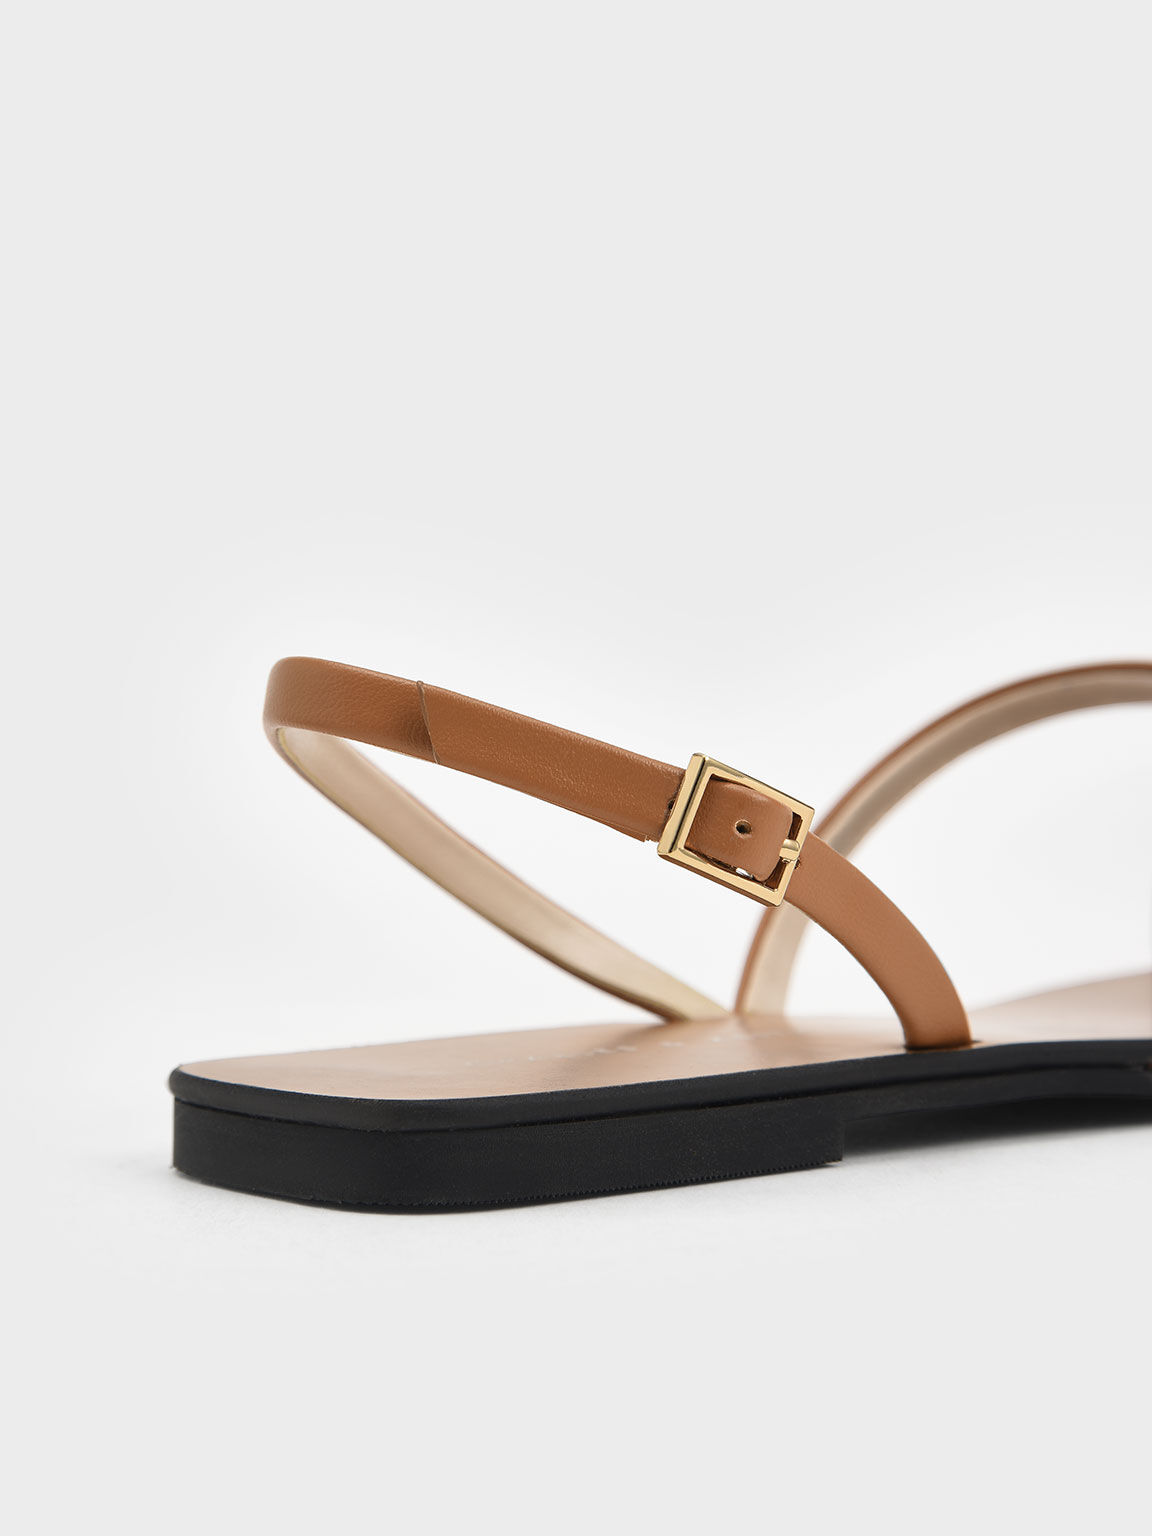 Strappy Square-Toe Slingback Sandals, Brown, hi-res